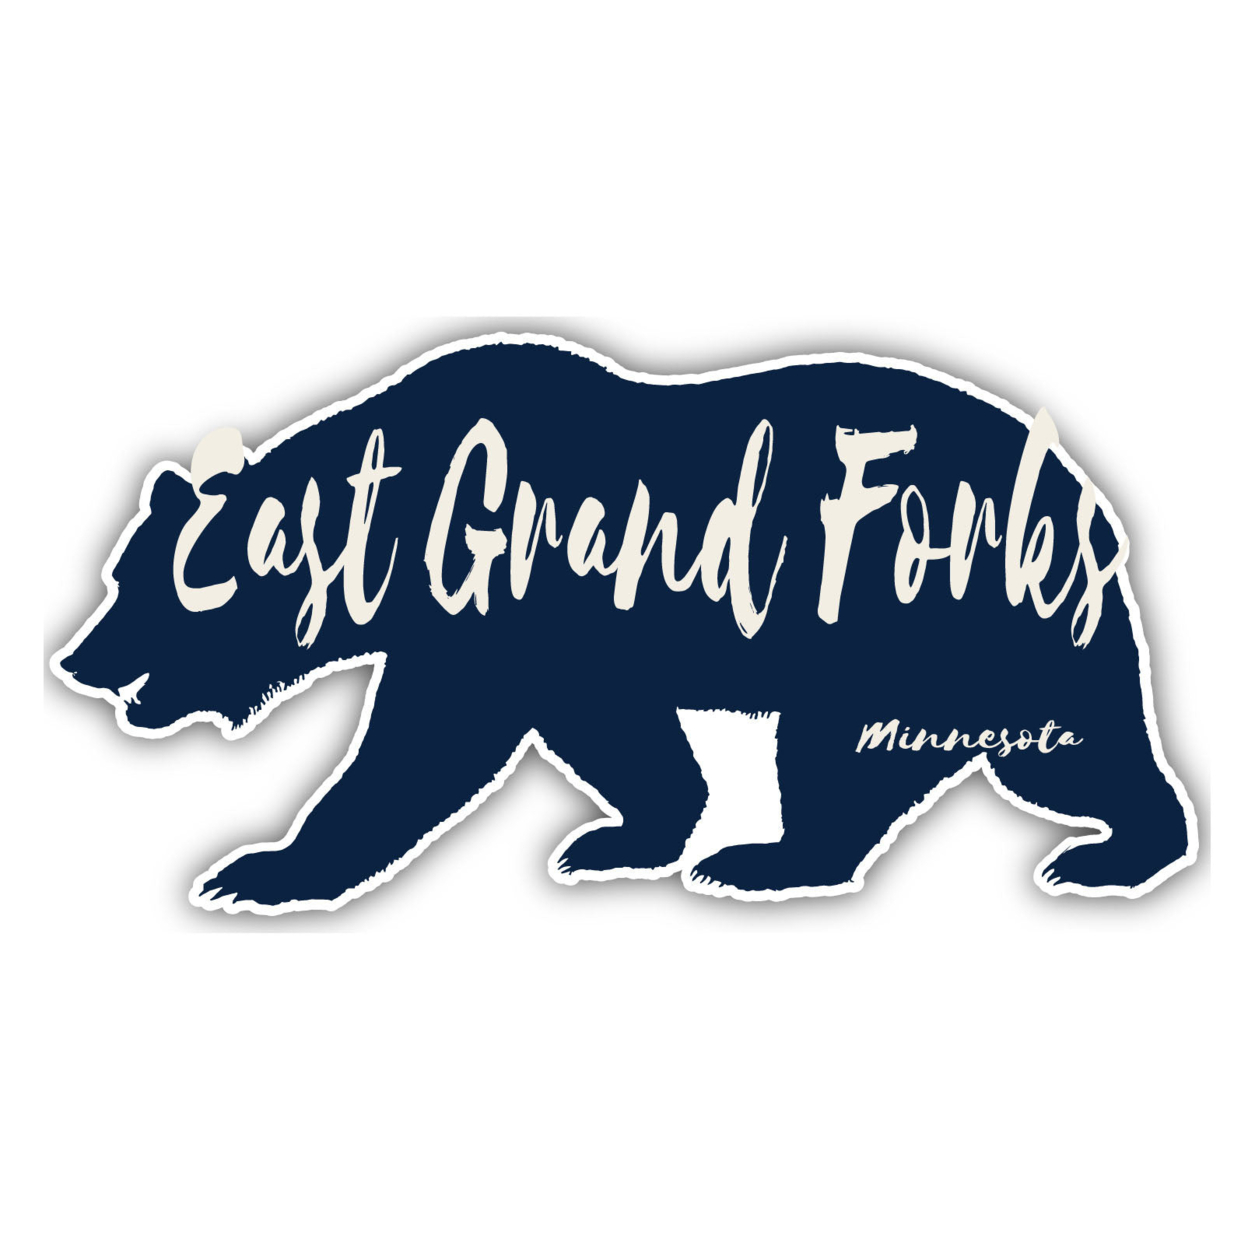 East Grand Forks Minnesota Souvenir Decorative Stickers (Choose Theme And Size) - Single Unit, 4-Inch, Tent